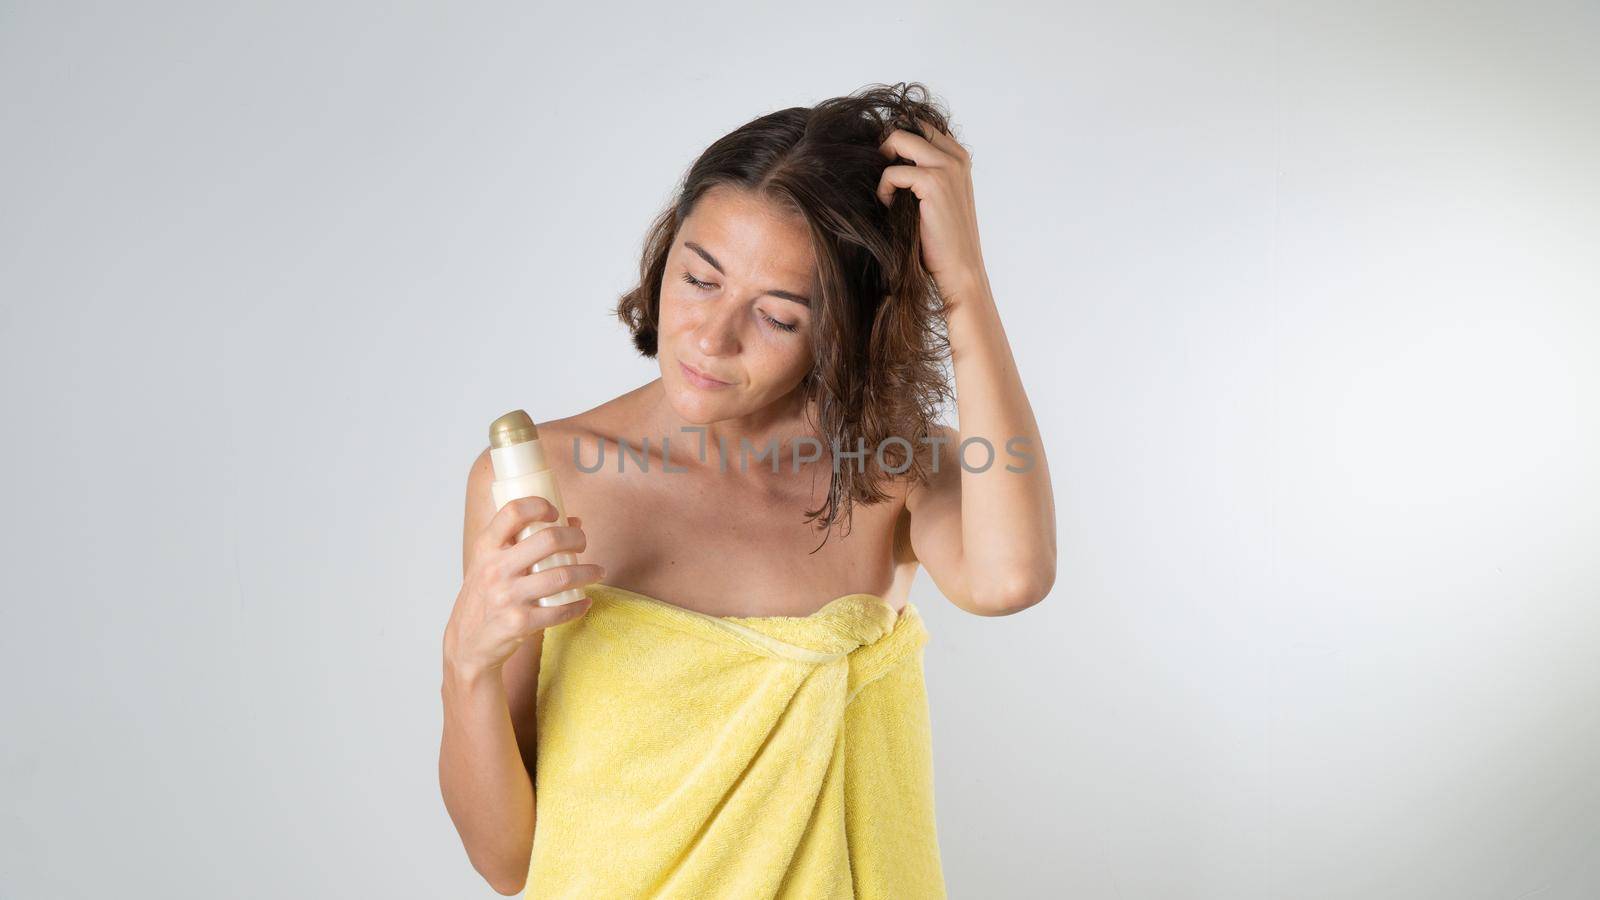 A woman applies serum balm to hair after a shower by voktybre